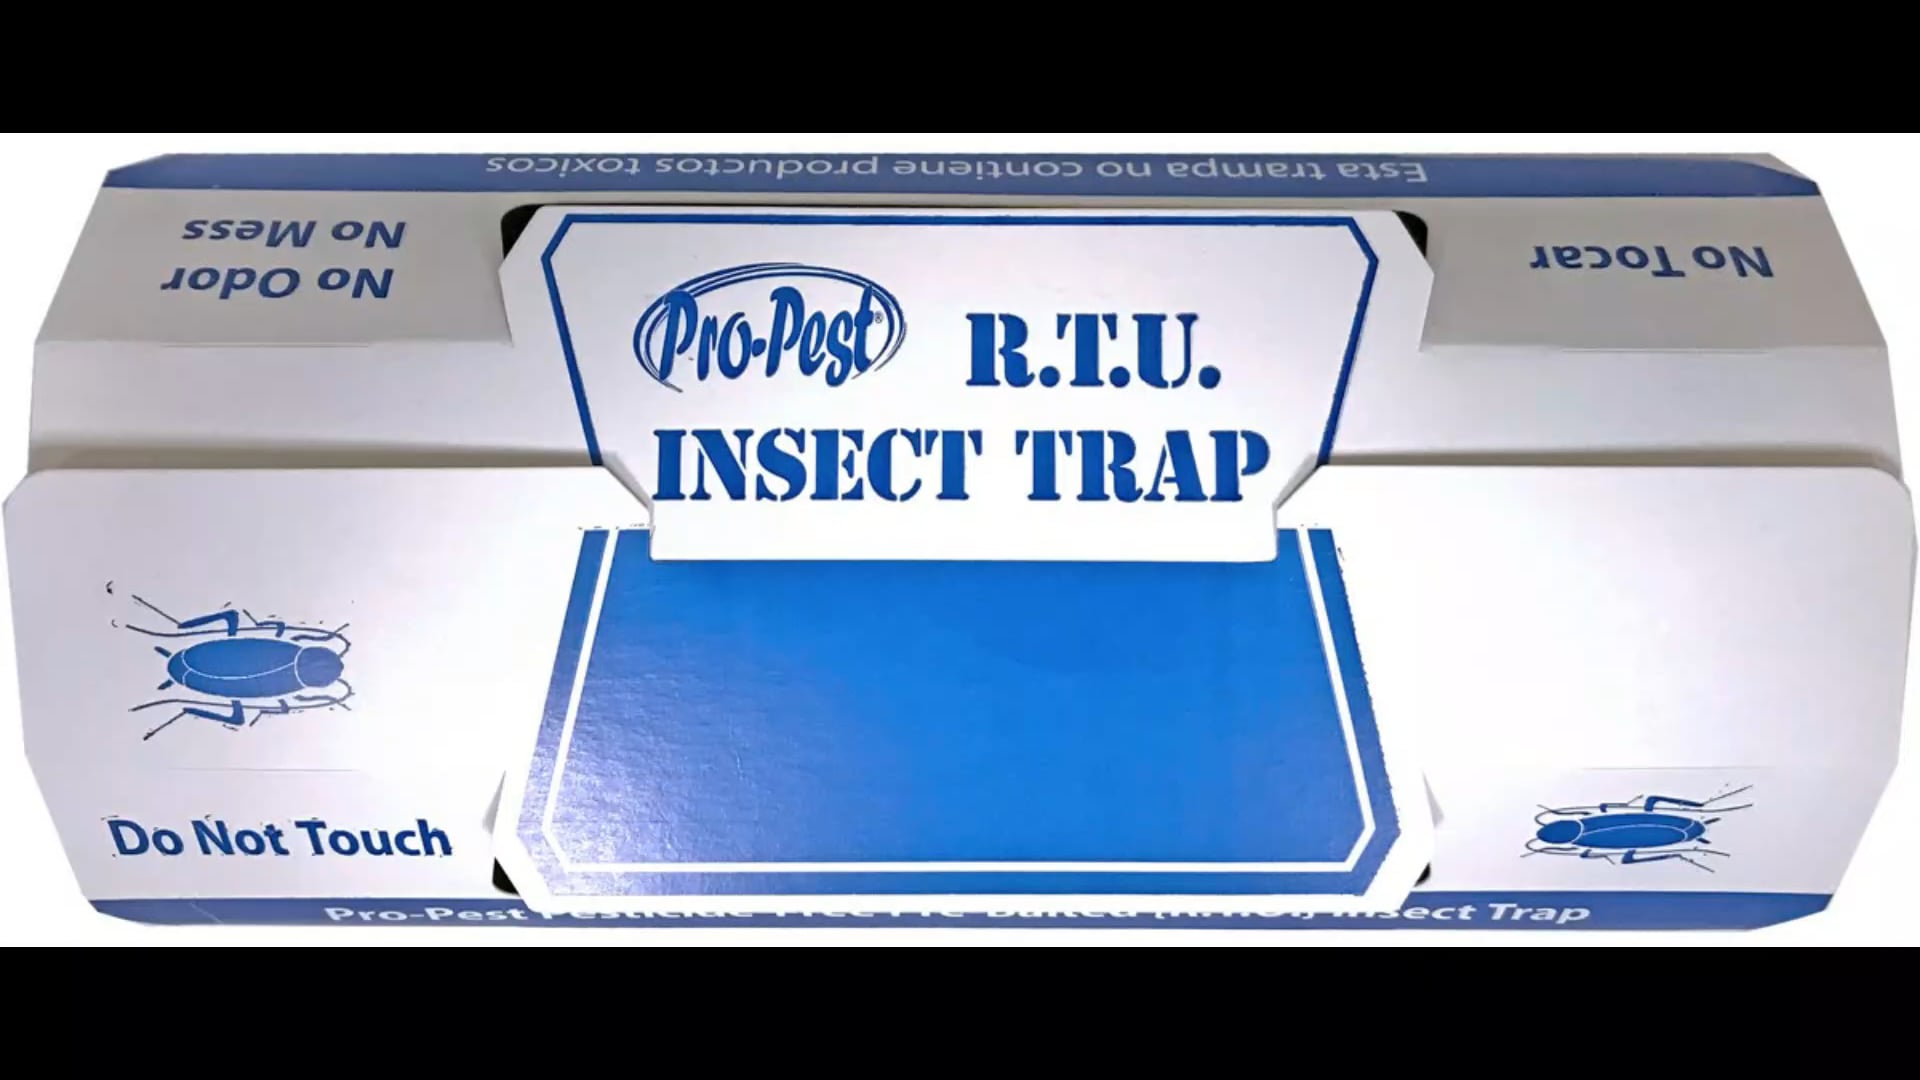 Pro-Pest RTU Roach & Insect Trap - preliminary roach treatment shows PMP where they are to know where to concentrate efforts...